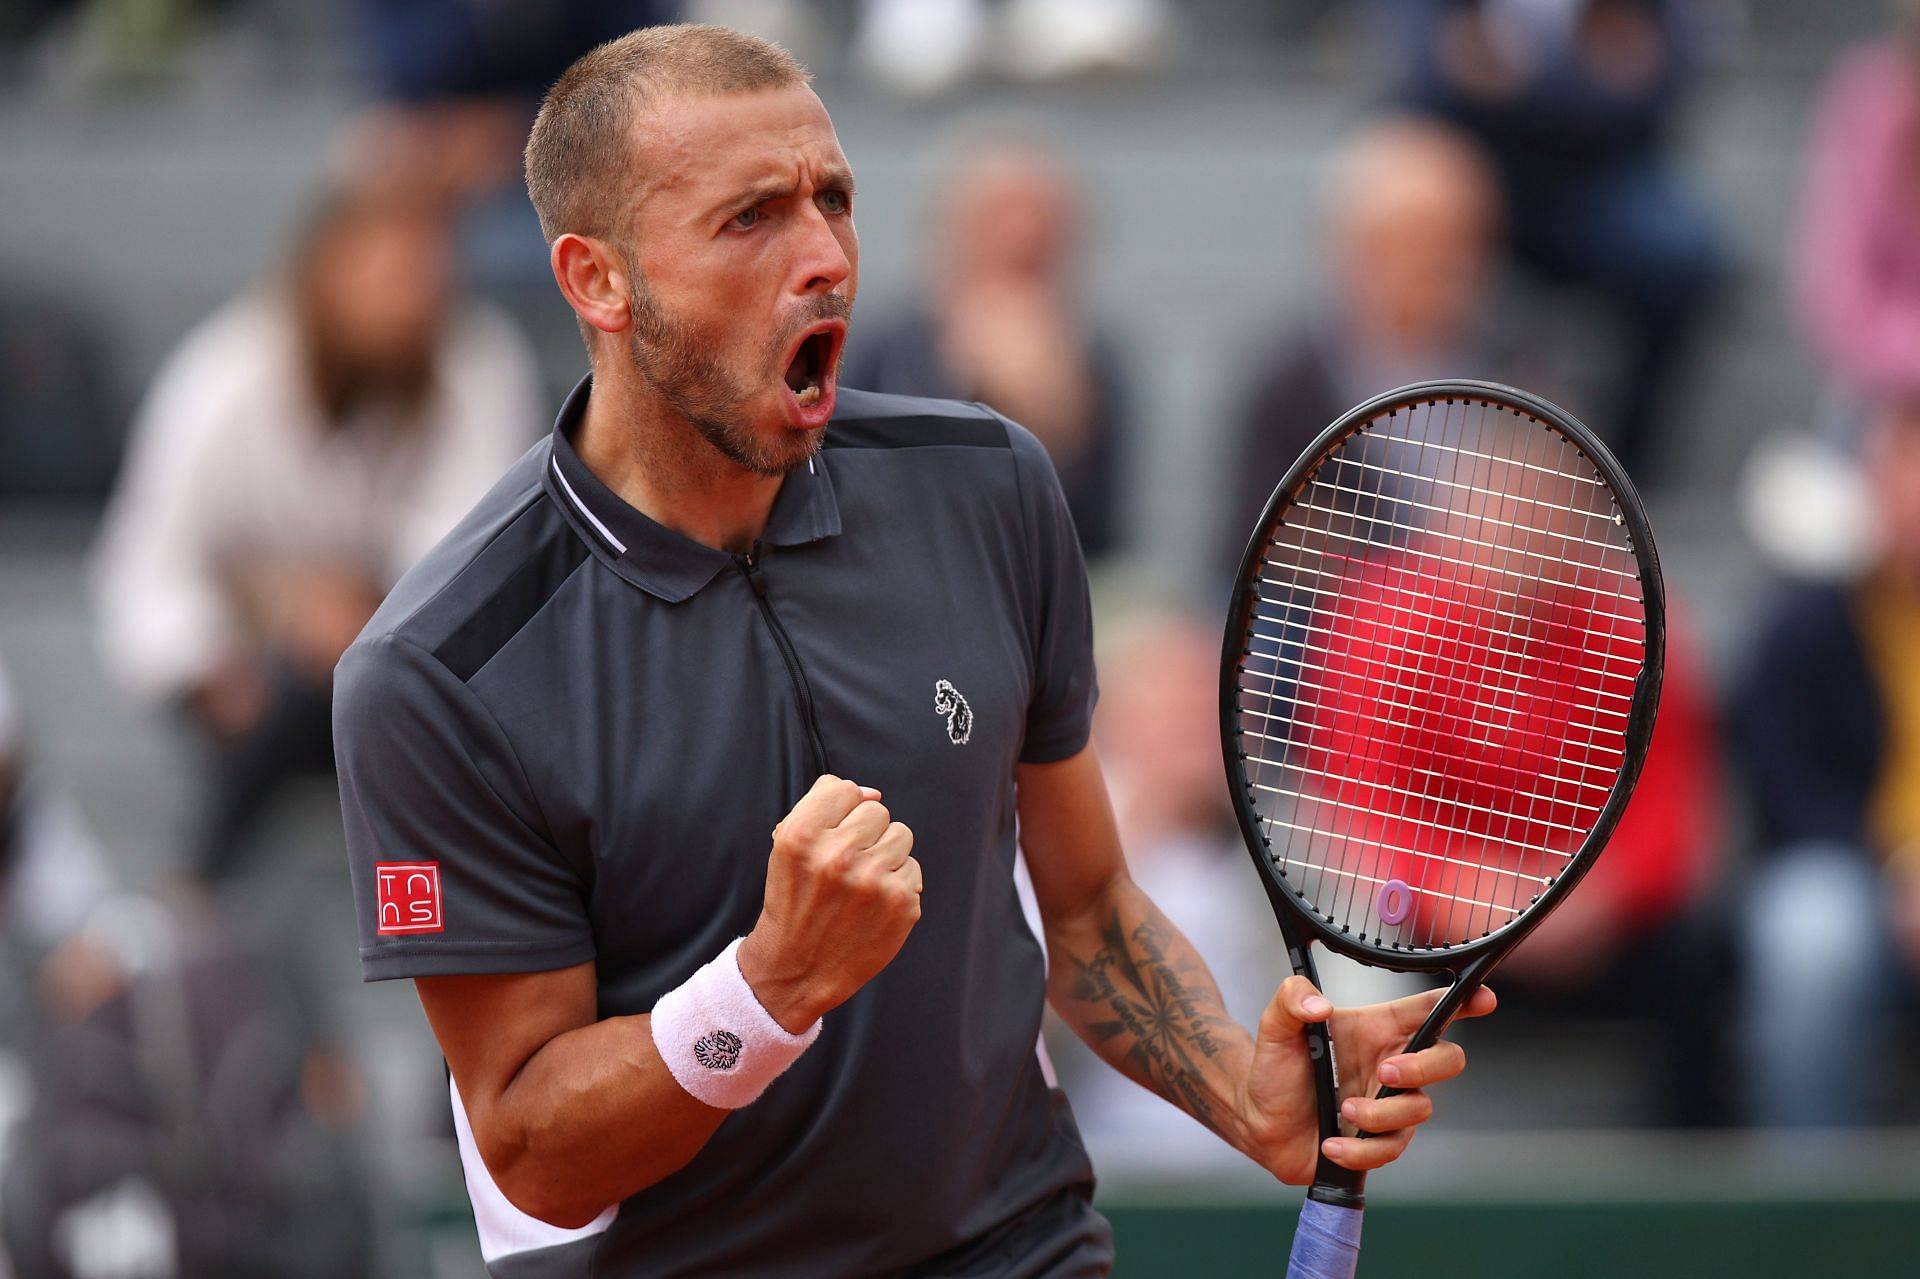 Dan Evans at the 2022 French Open - Day Two